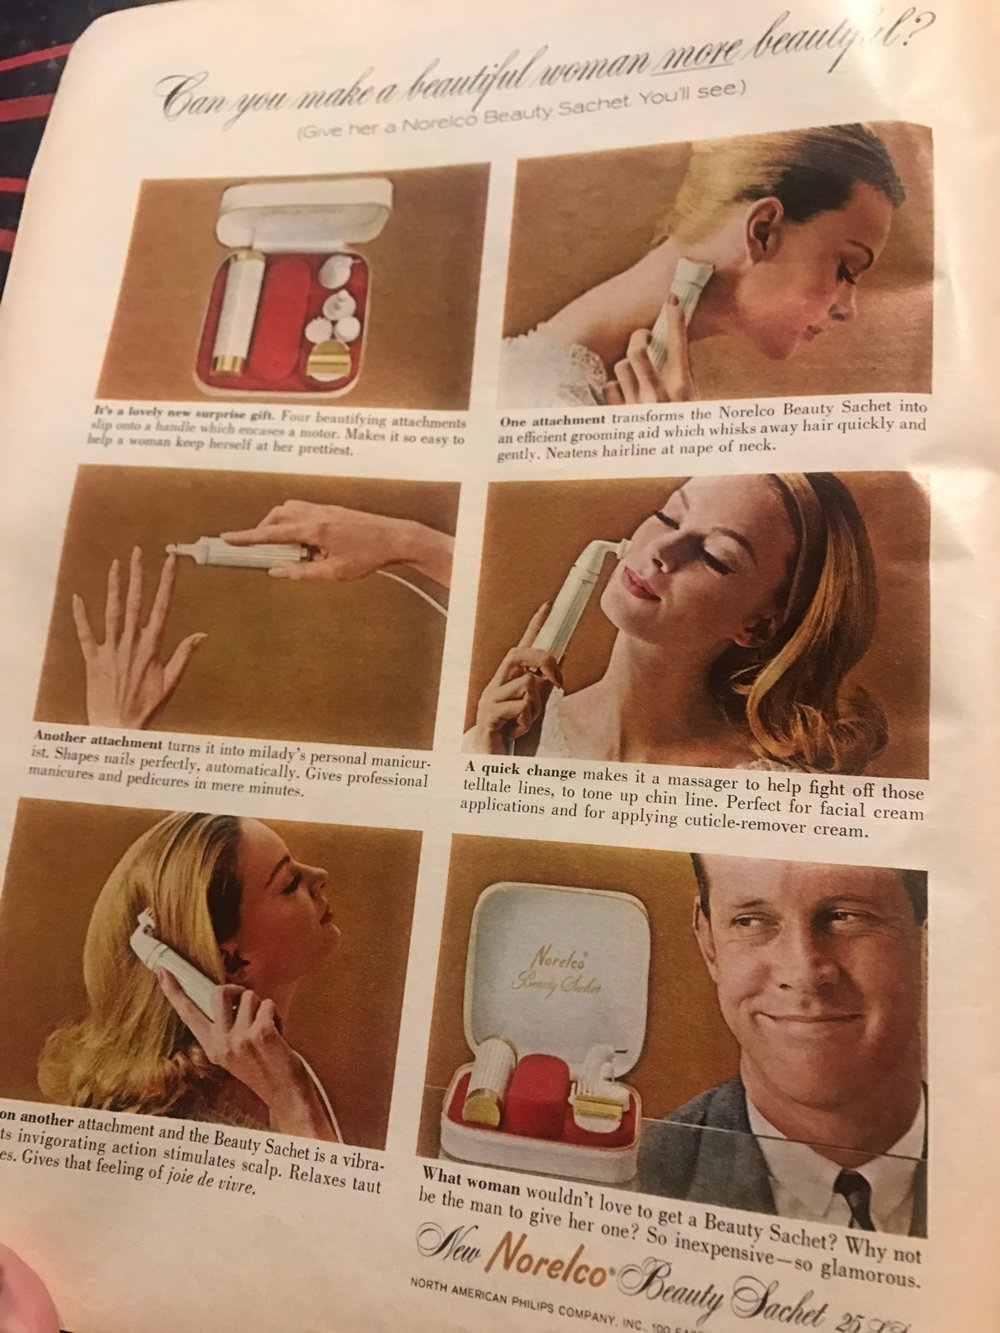 Yeah dude, get this vibrating tool for your wife to use on her "facial lines"... ;) Is that what they called those? Does it integrate with the vibrating bed in the Electric Home?